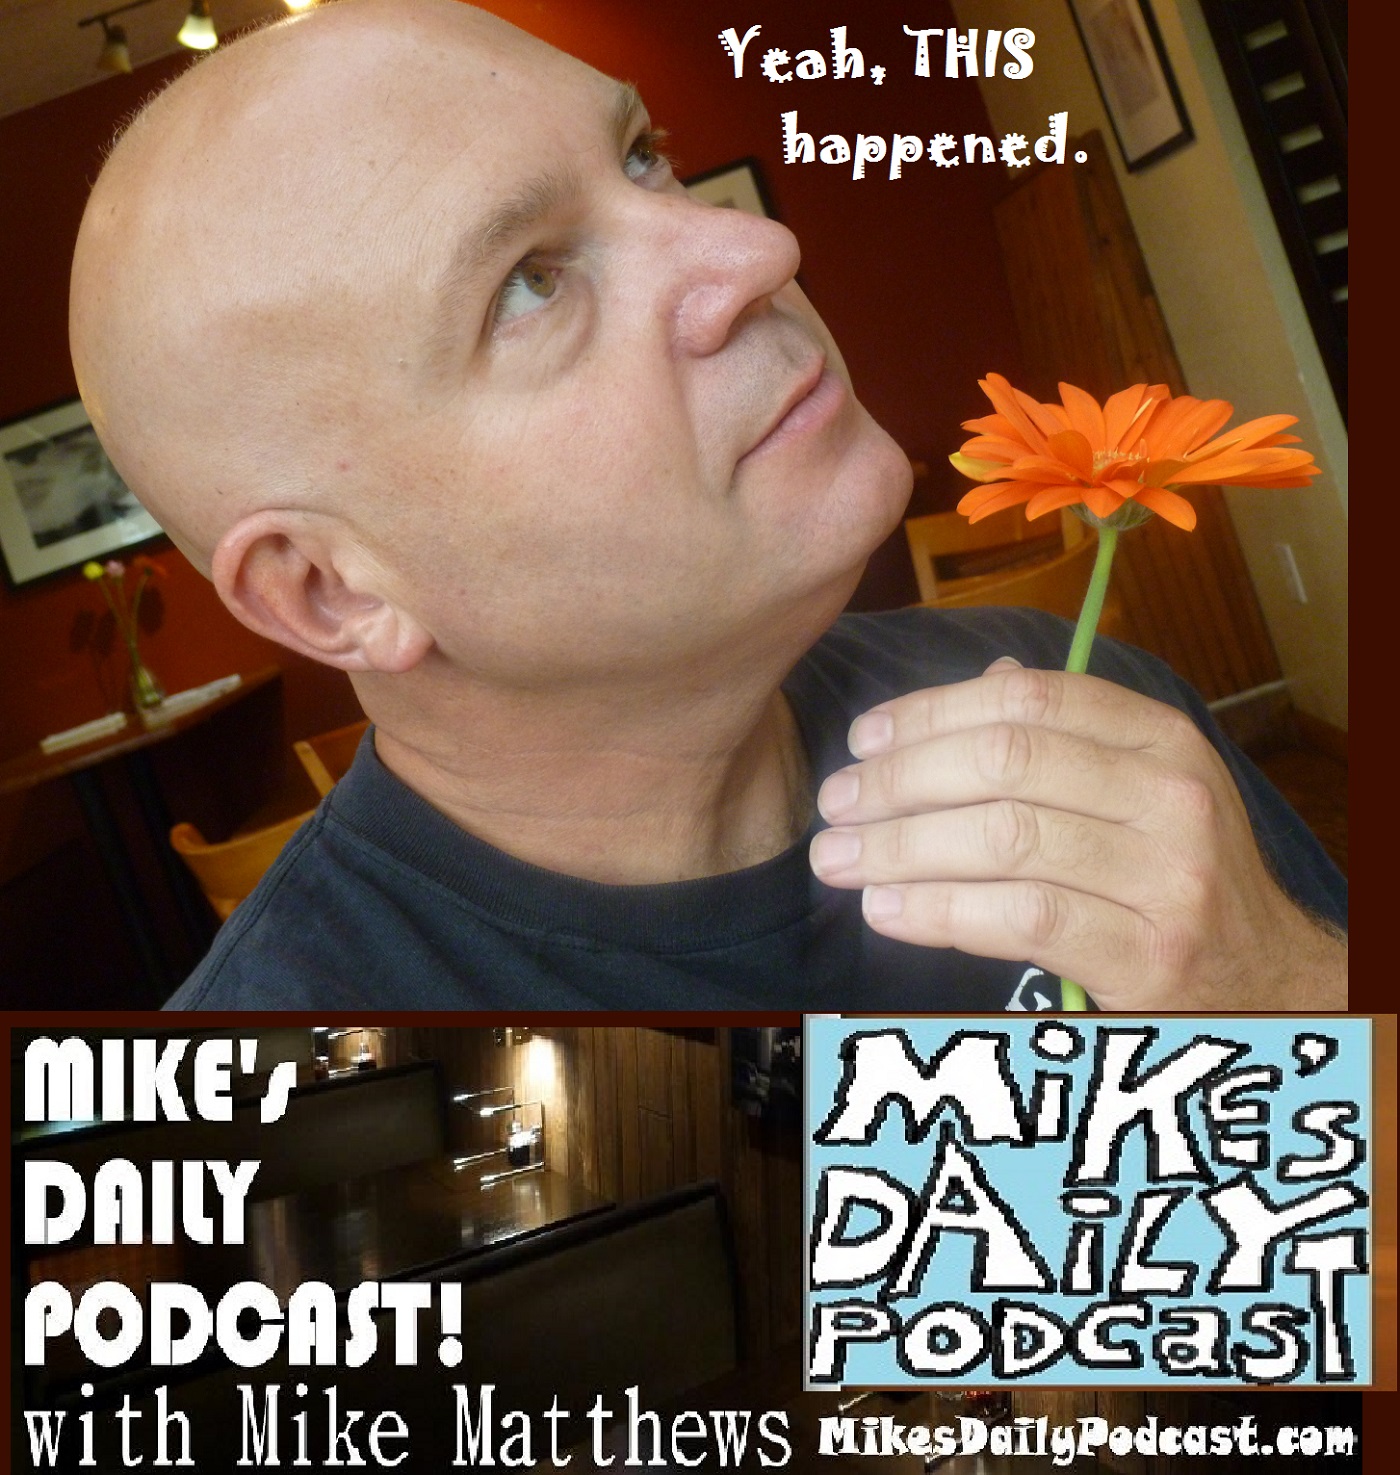 mikes-daily-podcast-1193-mike-matthews-flower